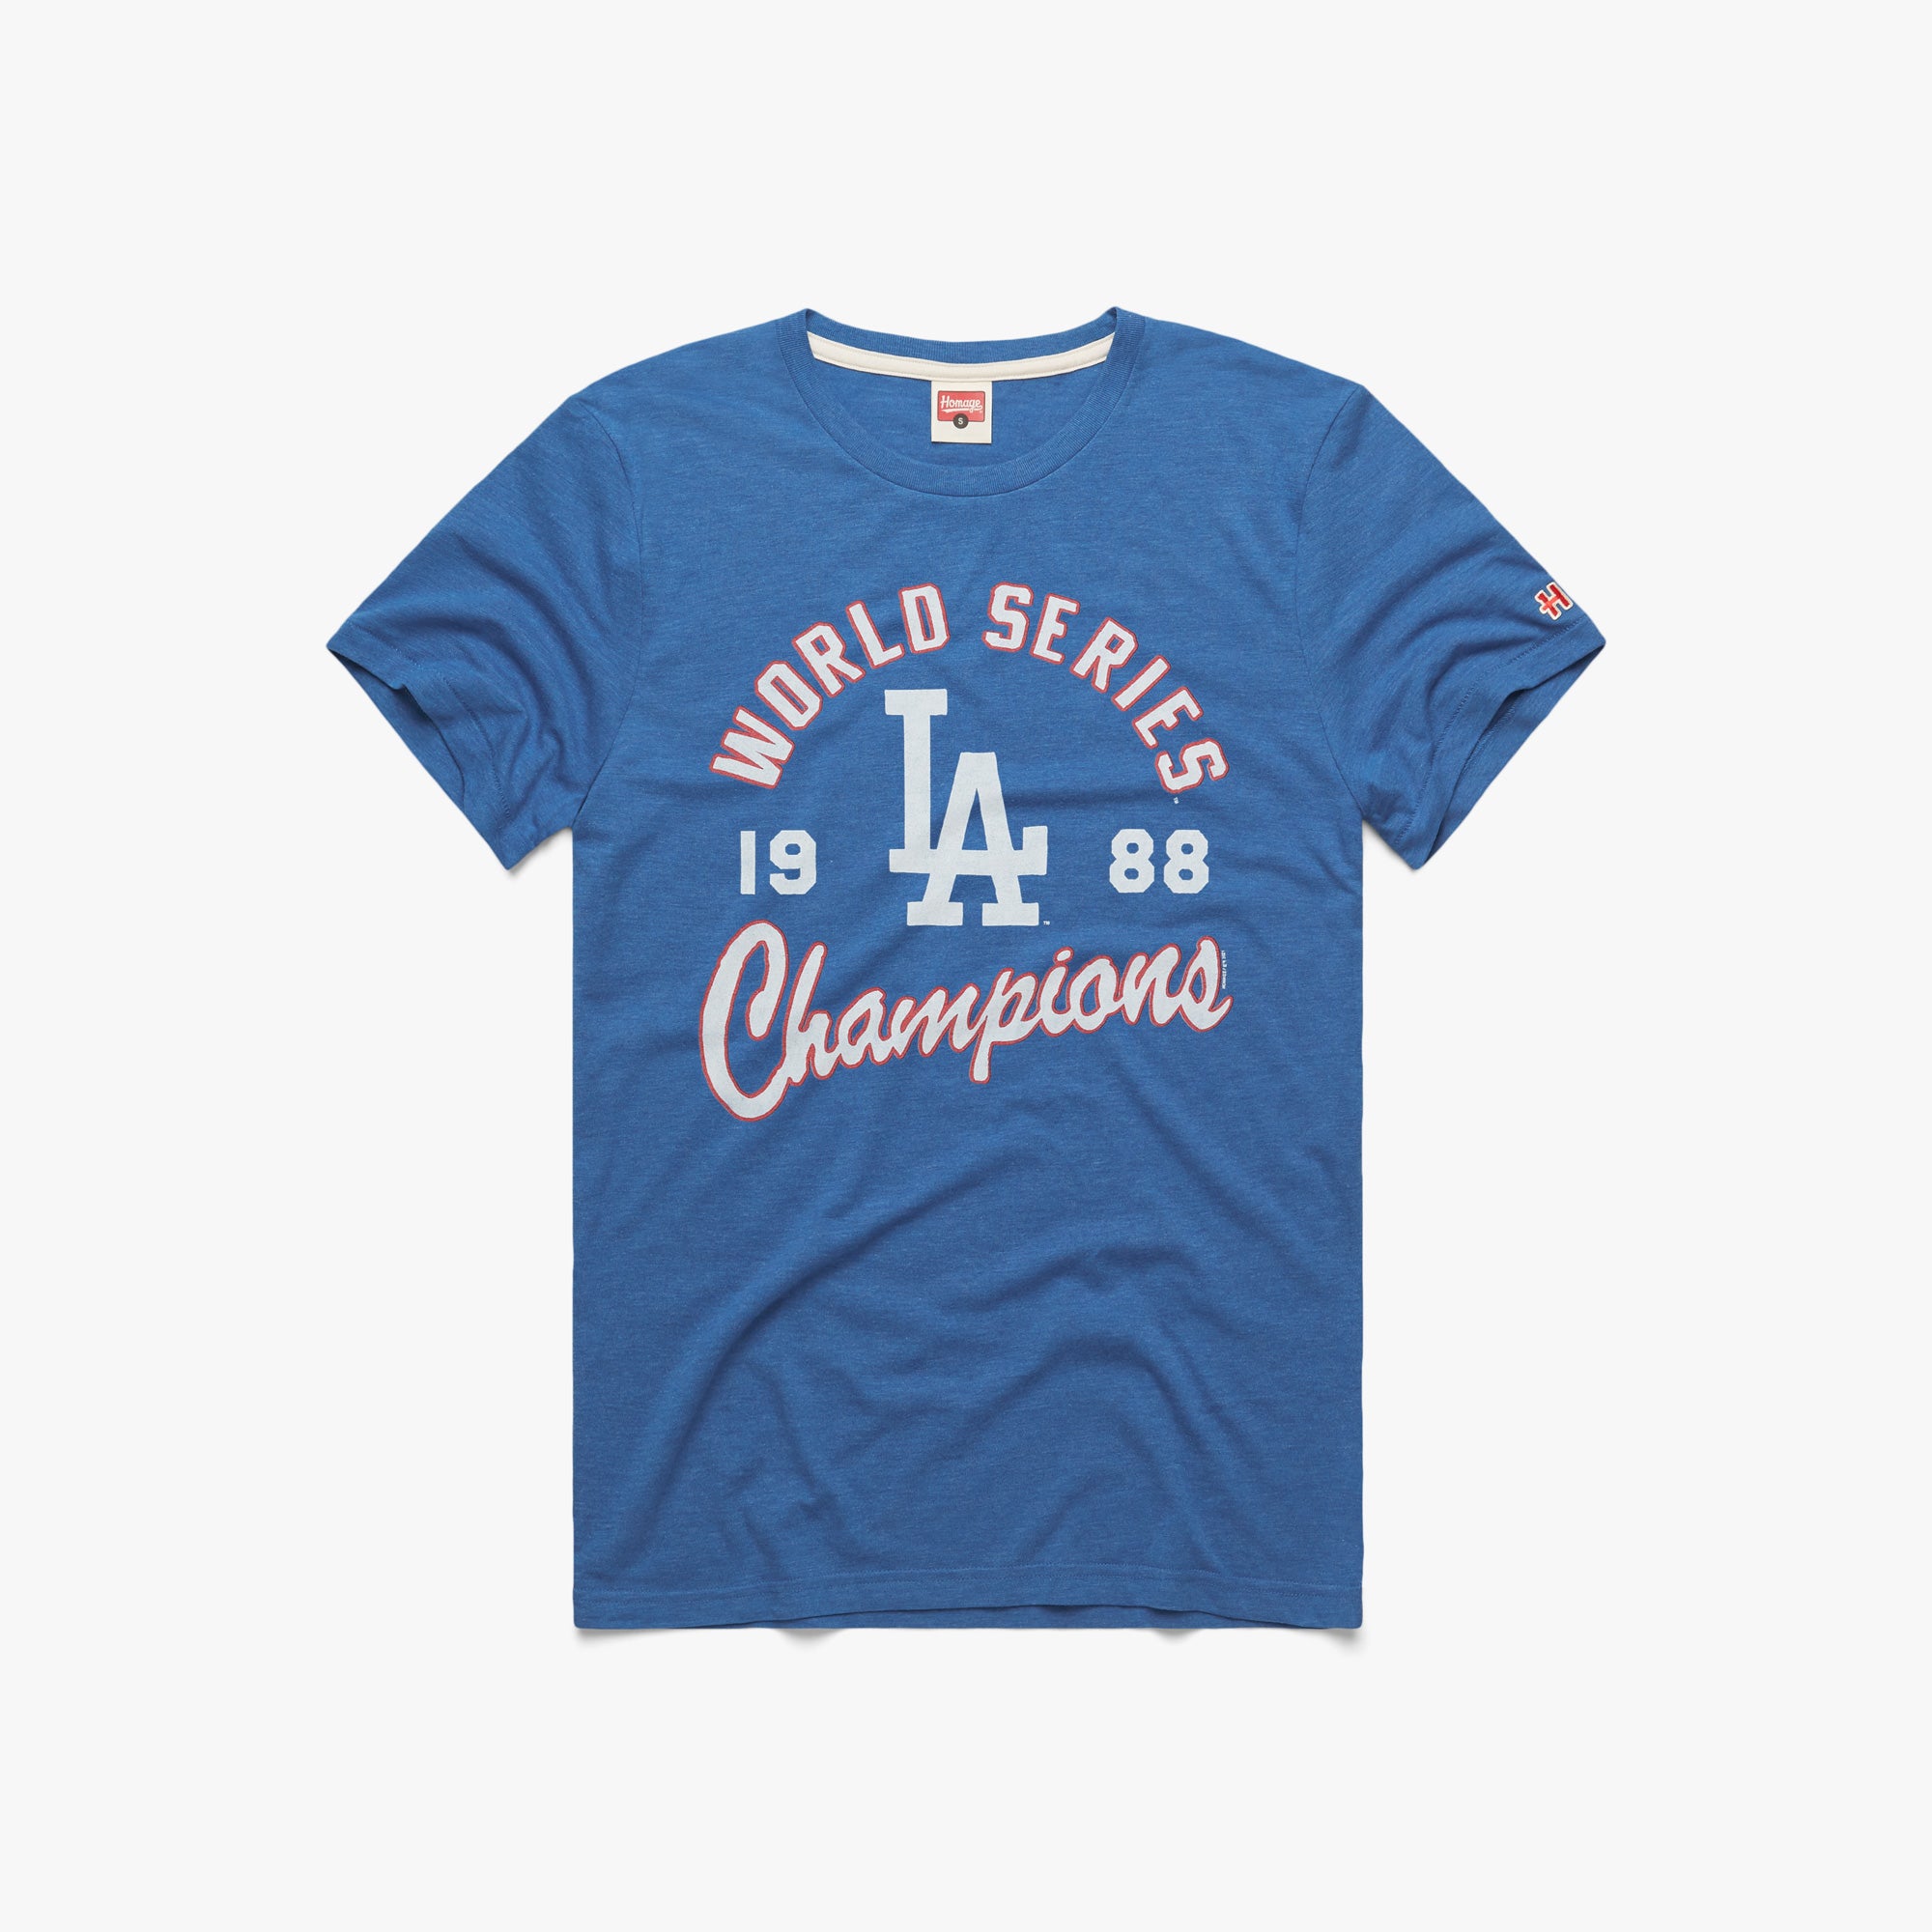 Dodgers World Series Champs 1988